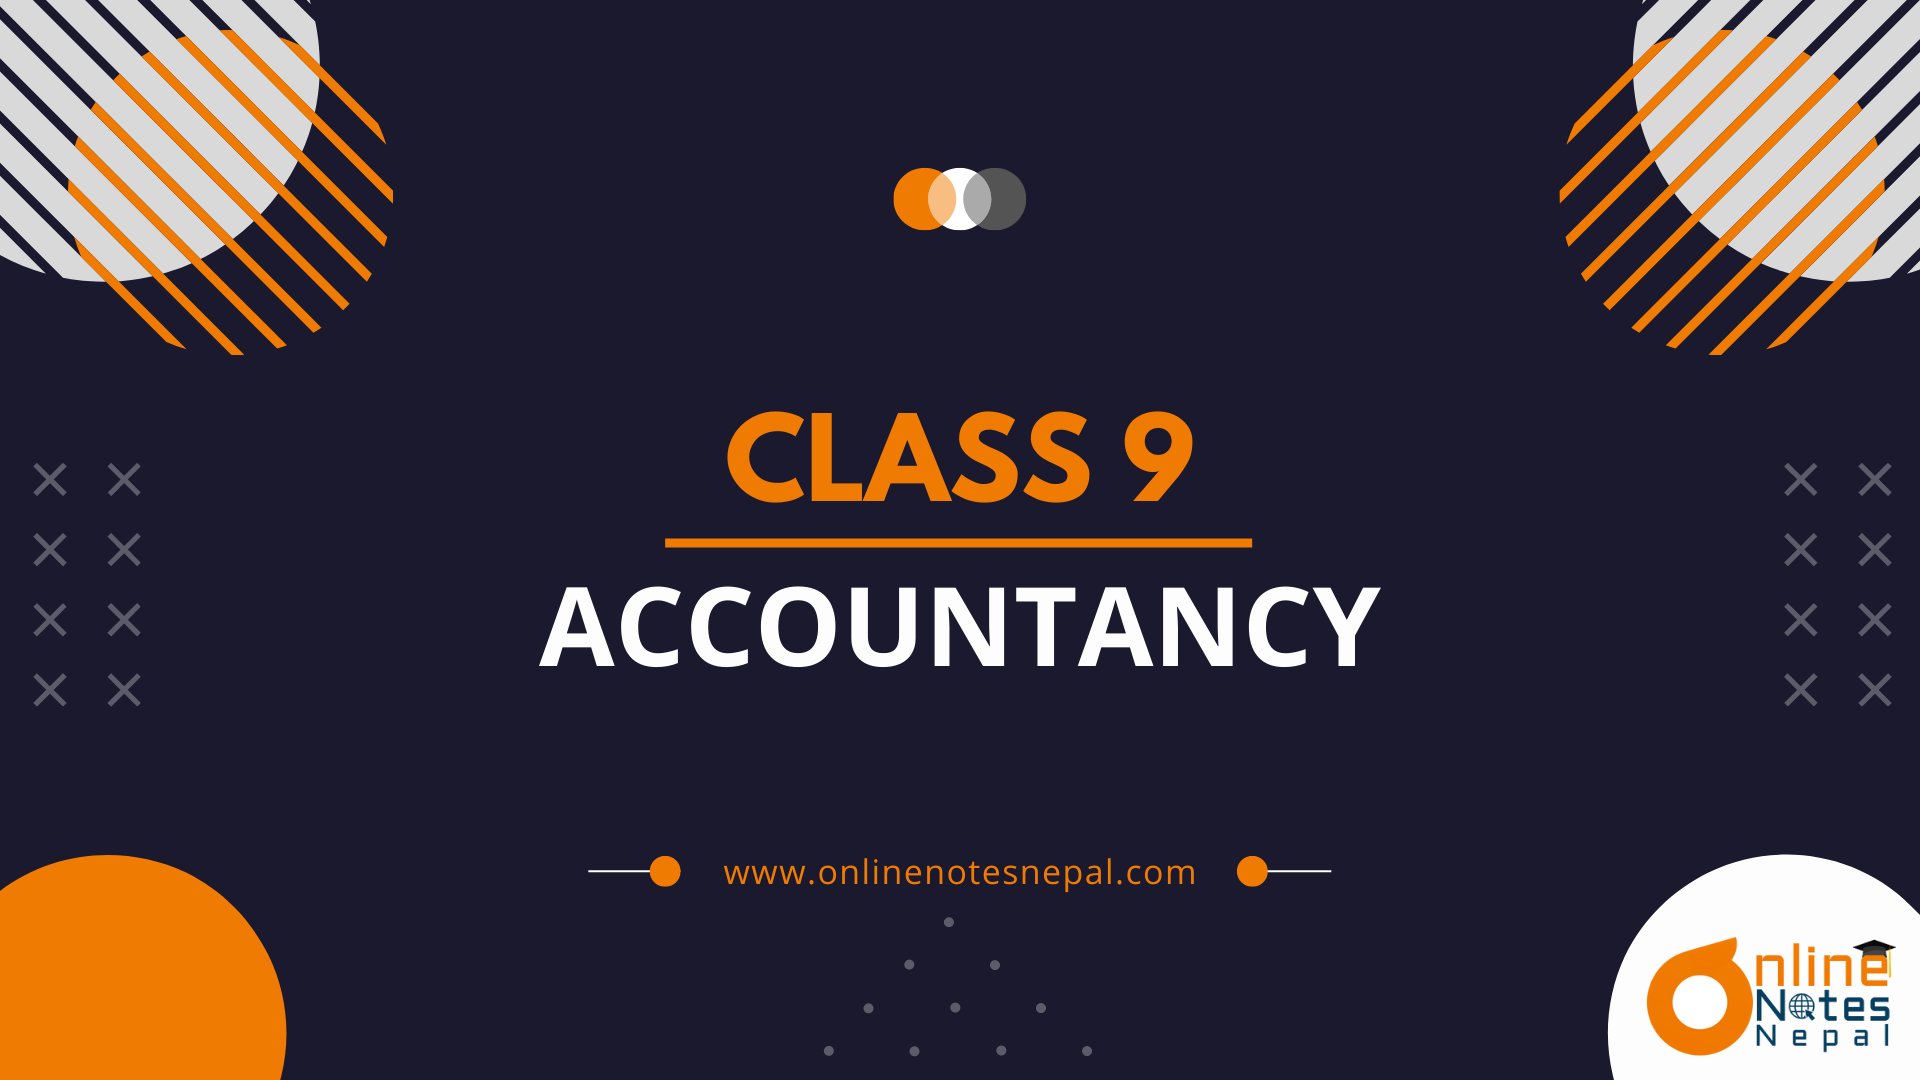 Accountancy in grade-9, Reference Note